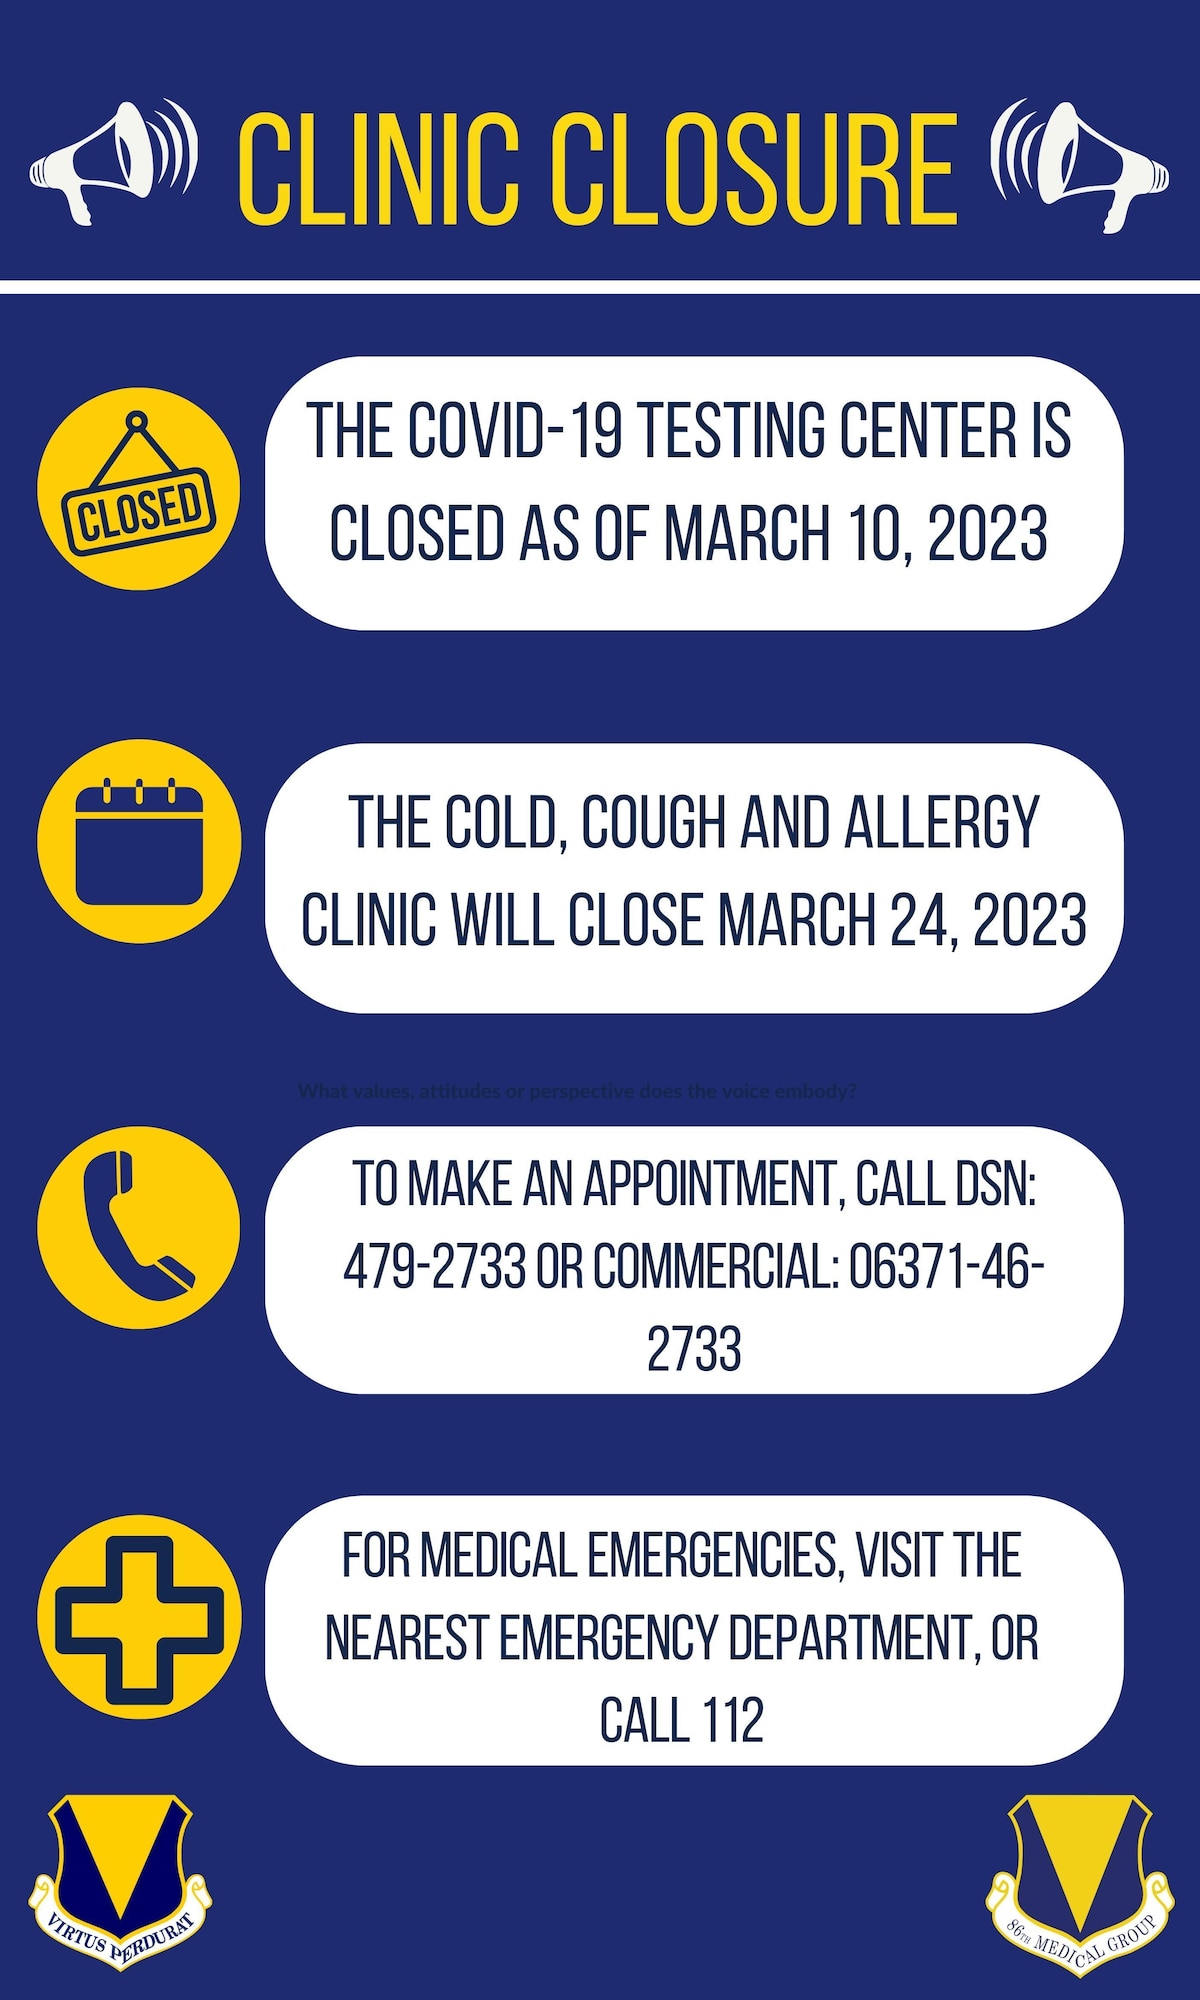 This graphic shows information regarding the closure of the Covid clinic and the Cold, Cough and Allergy Clinic.